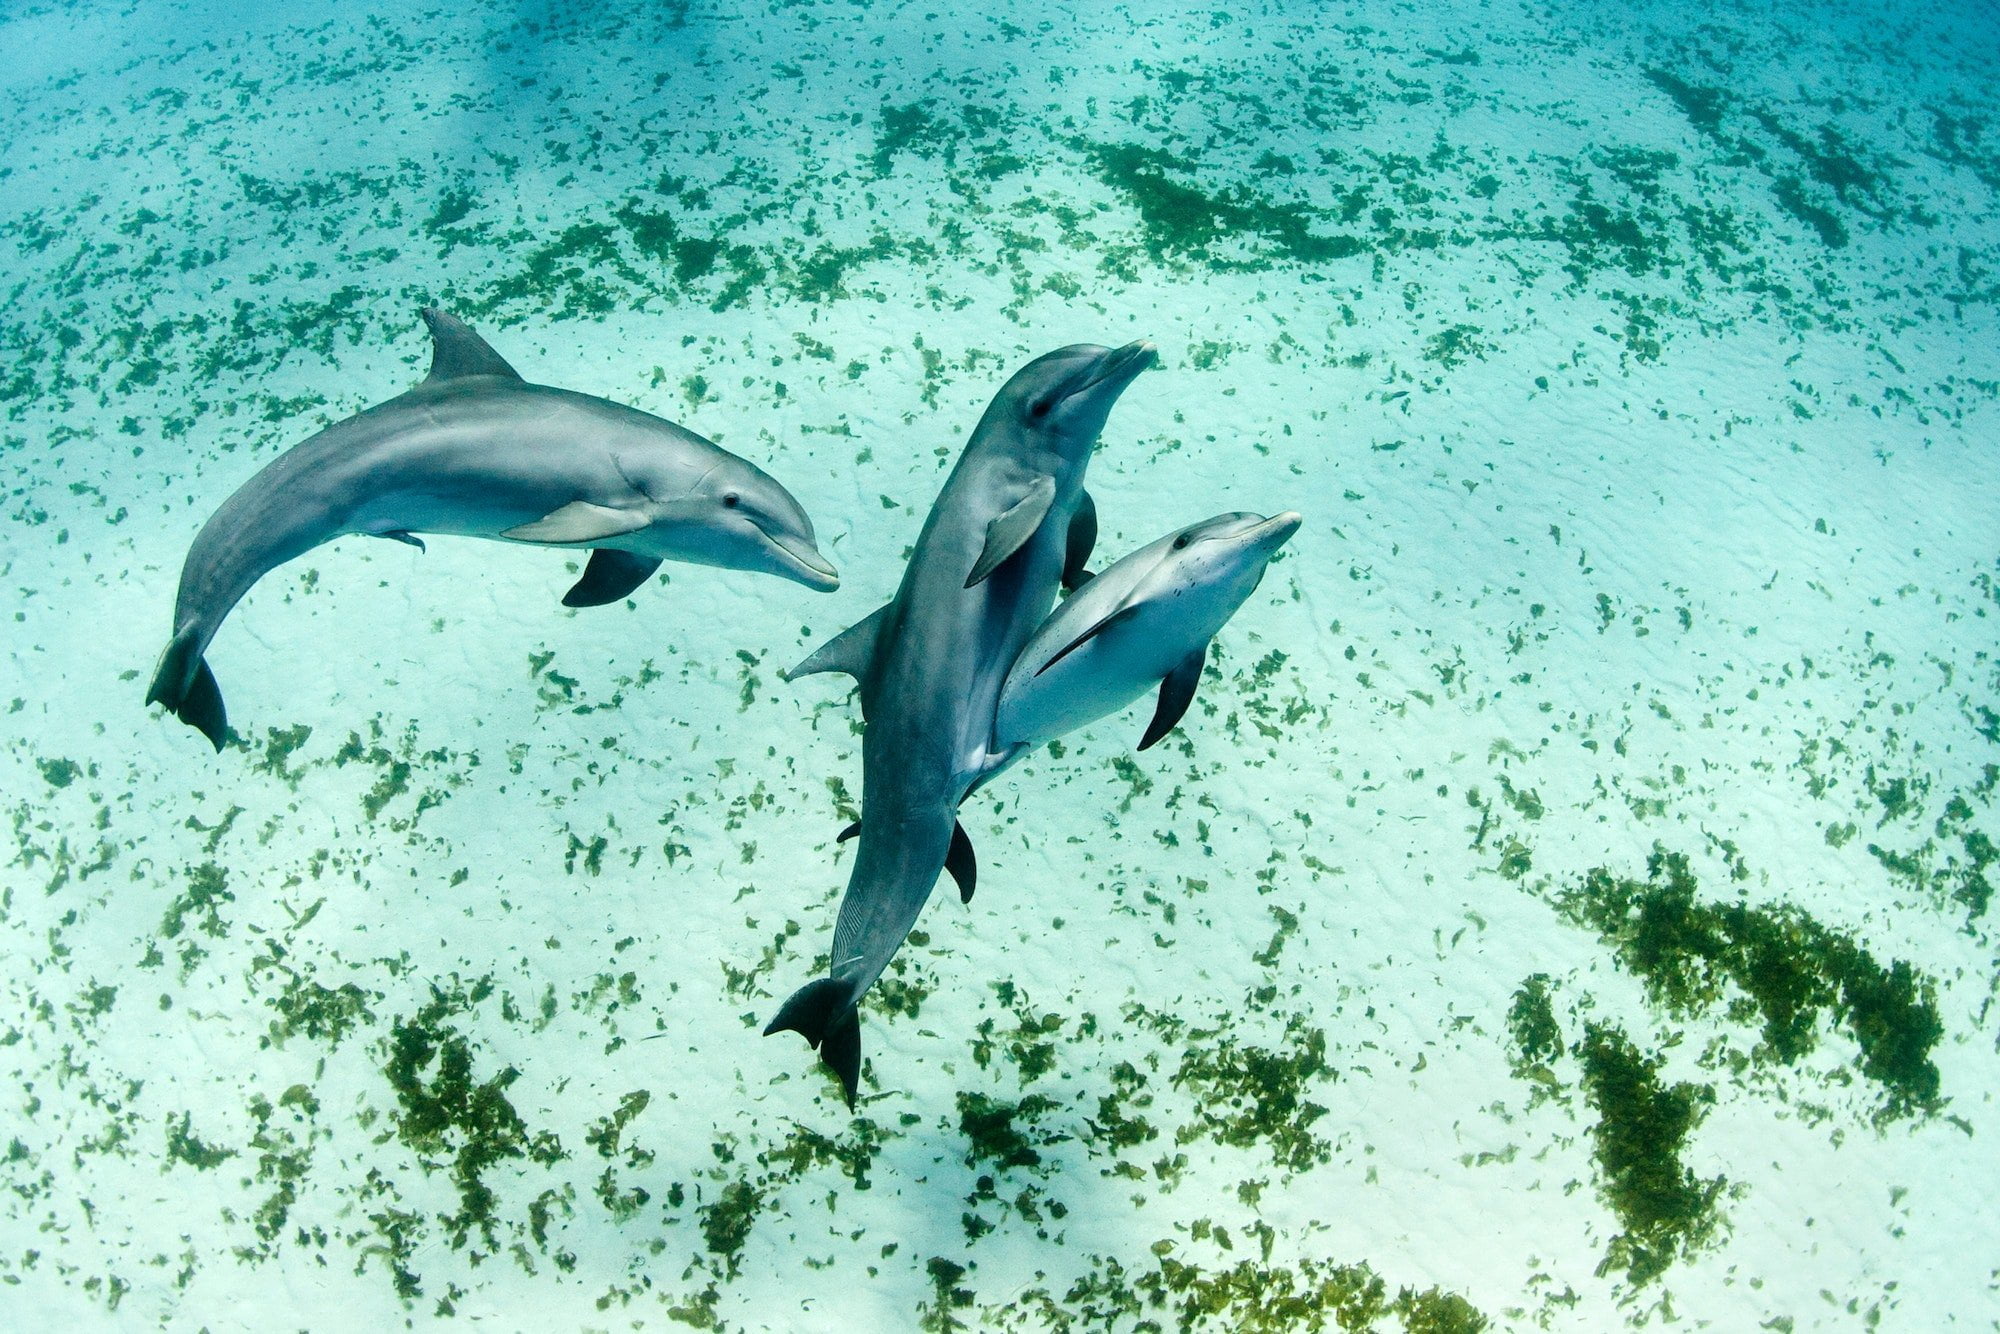 Dolphins swimming in tropical water